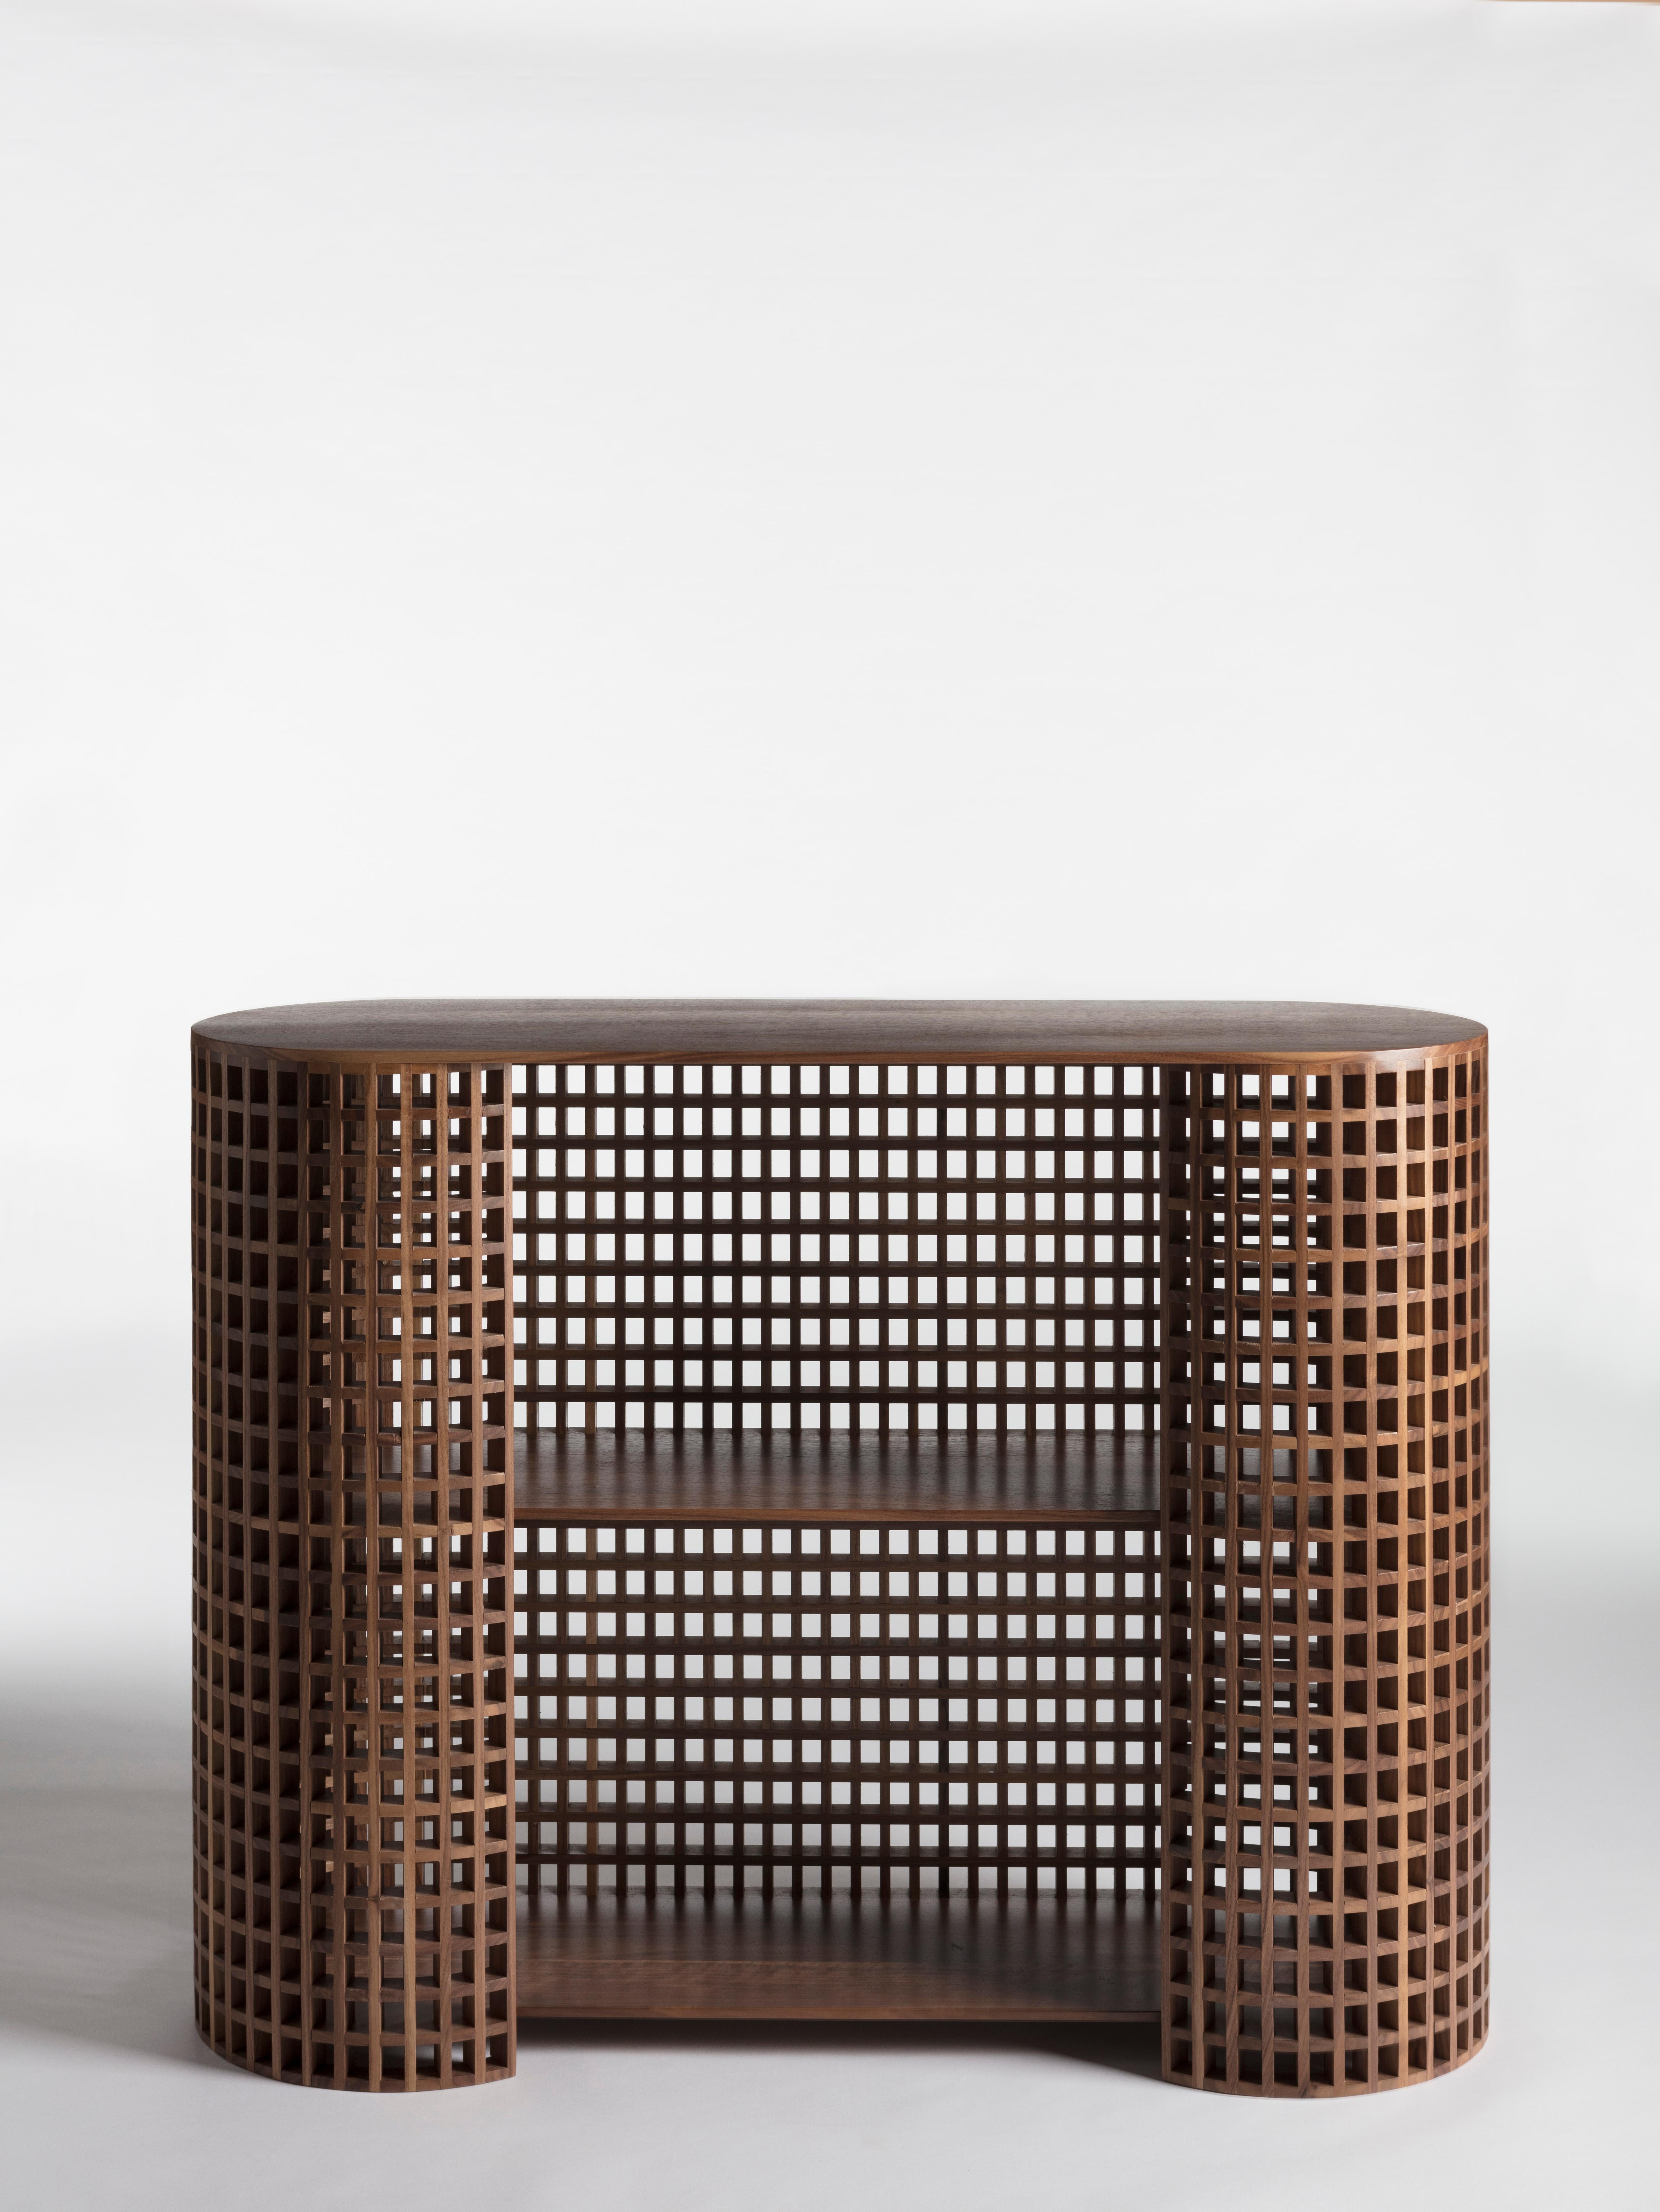 Carabottino is a collection made of a clever play of textures and
transparencies, that makes these objects the centerpiece of any environment. A
storage unit, a mirror or a table that establishes a dialogue between inside and
outside.A wooden